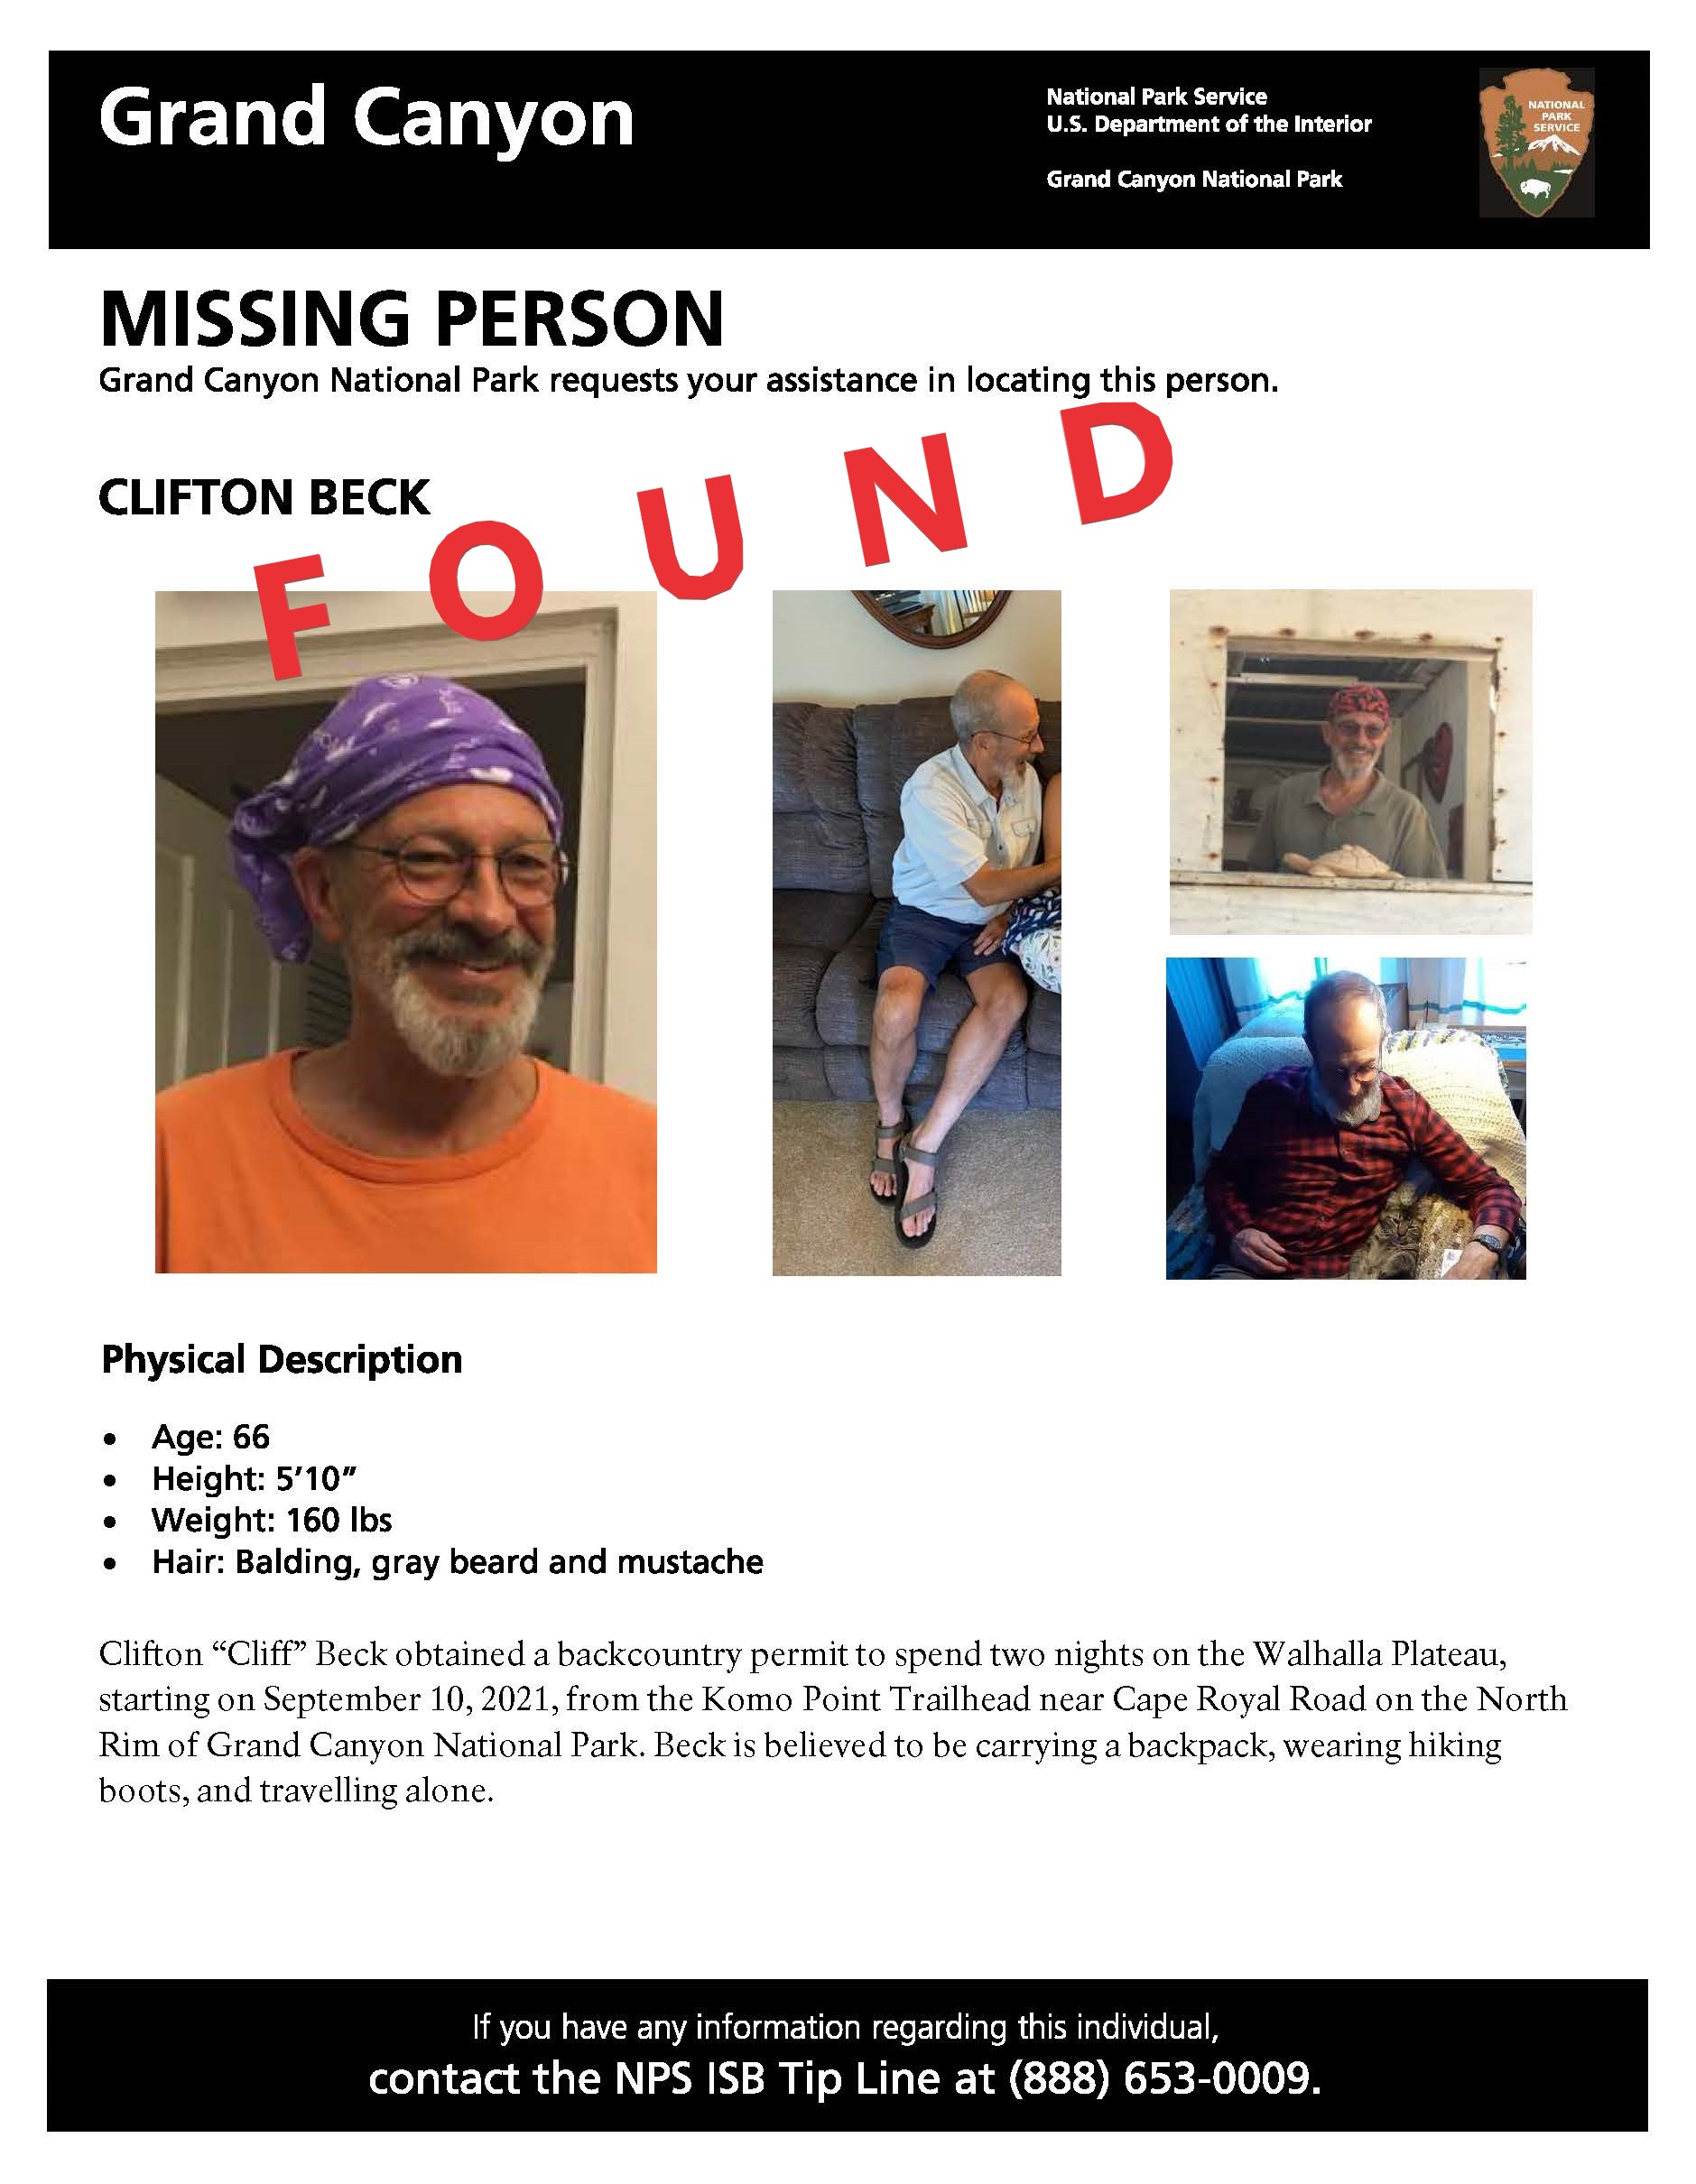 Beck missing person flyer with the word "found" in red lettering